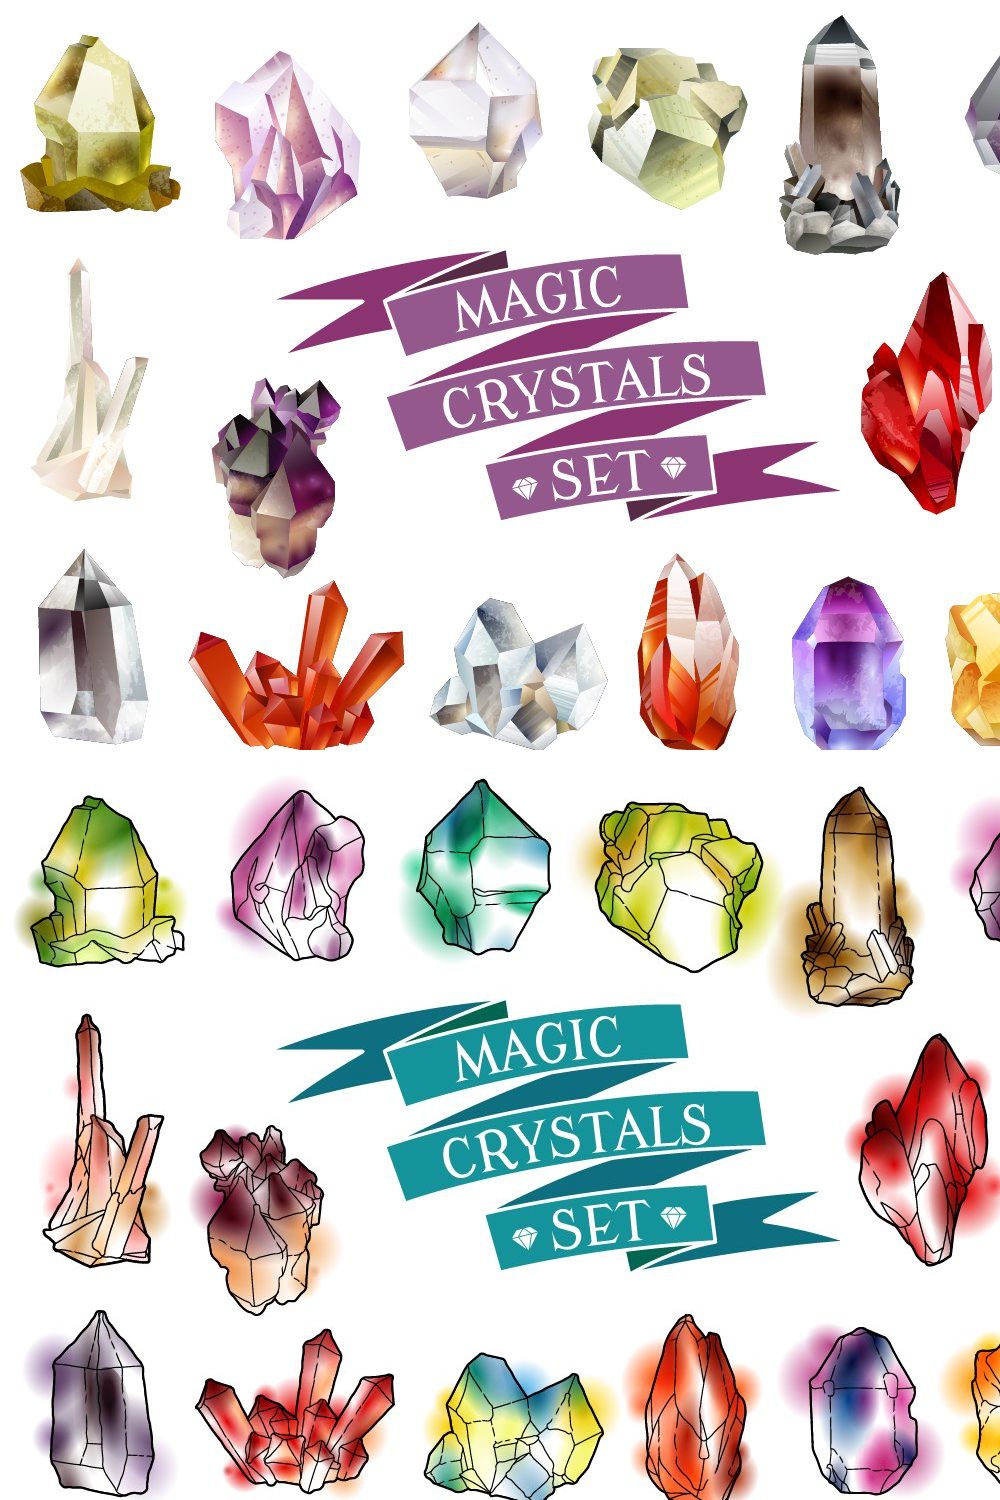 Crystals set pinterest preview image.